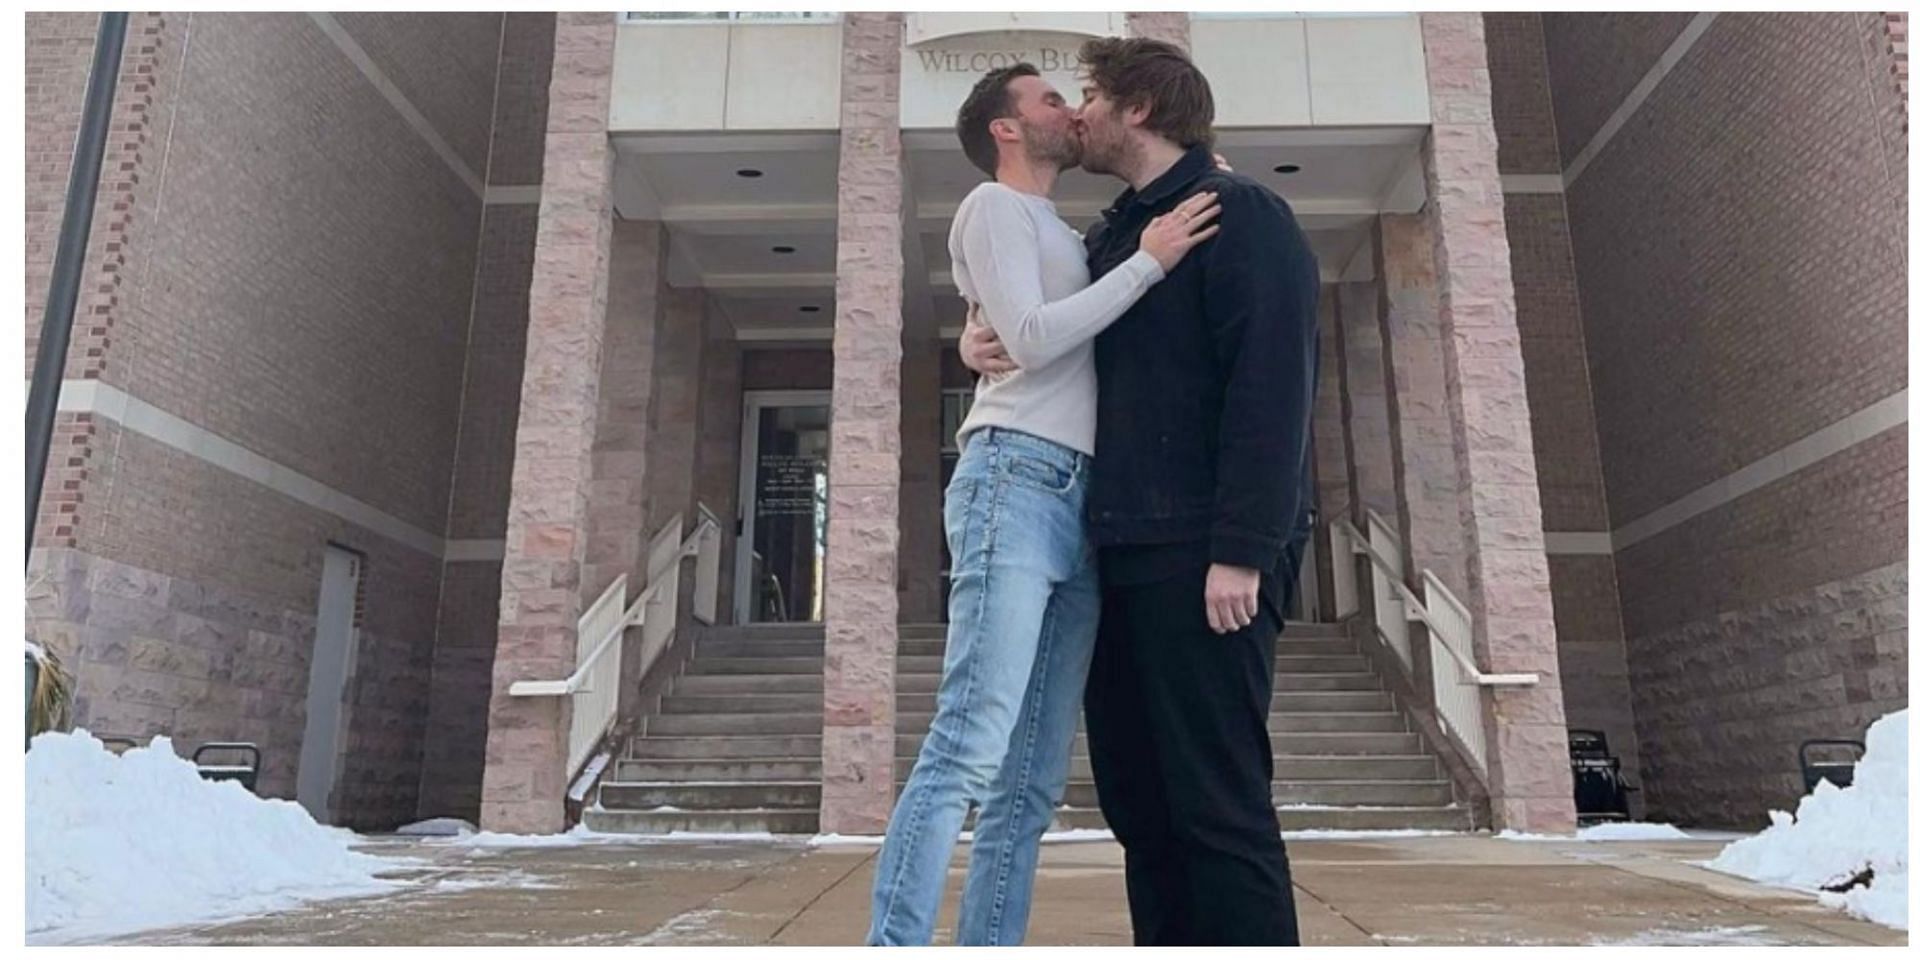 Where did Shane and Ryland get married? More details about the YouTuber